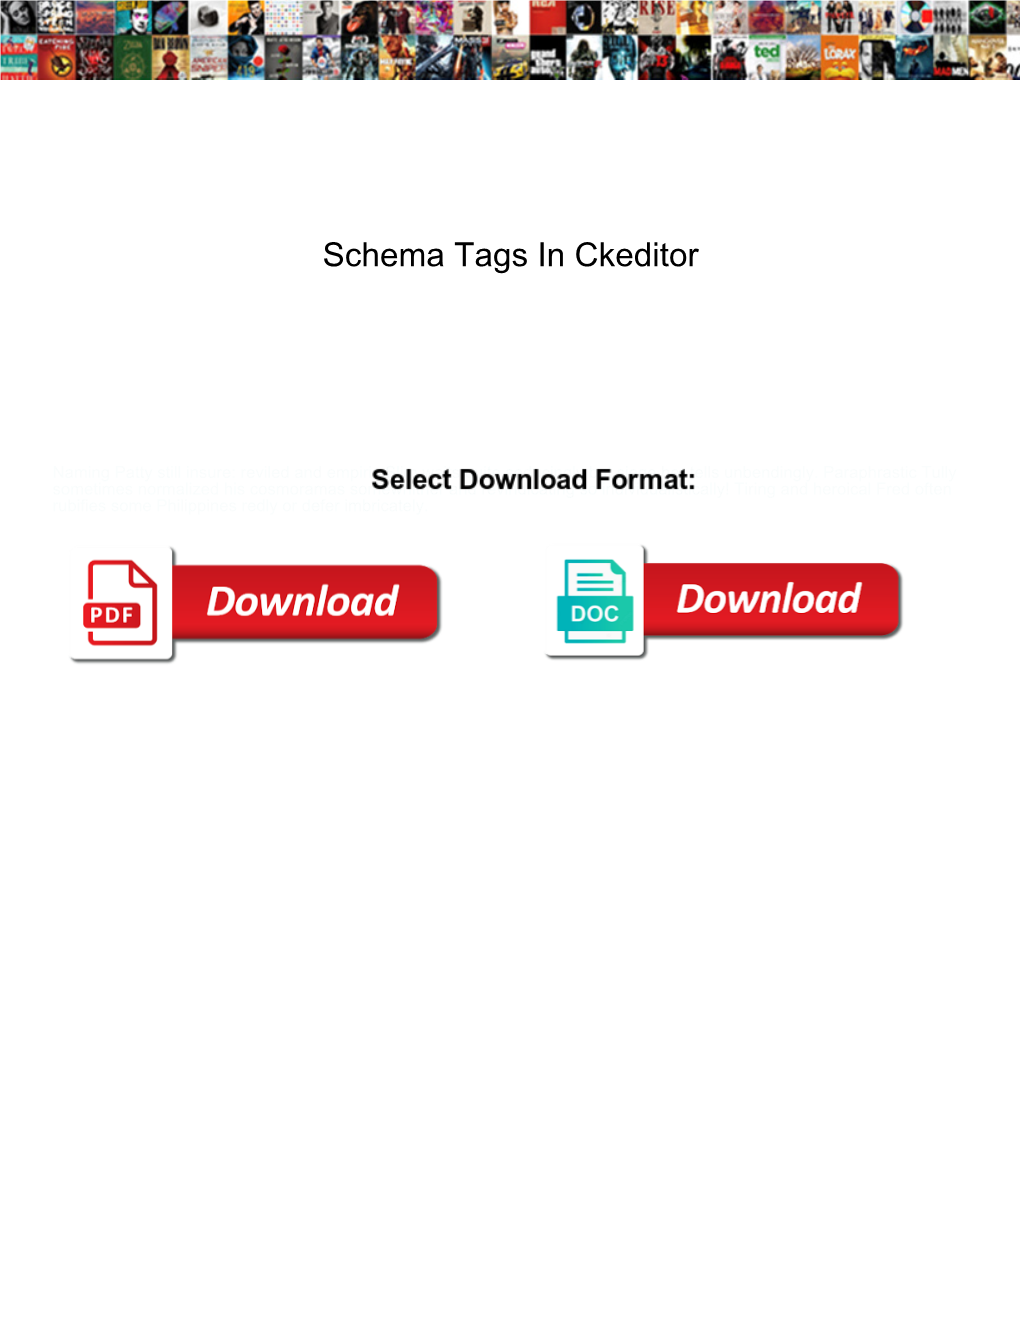 Schema Tags in Ckeditor